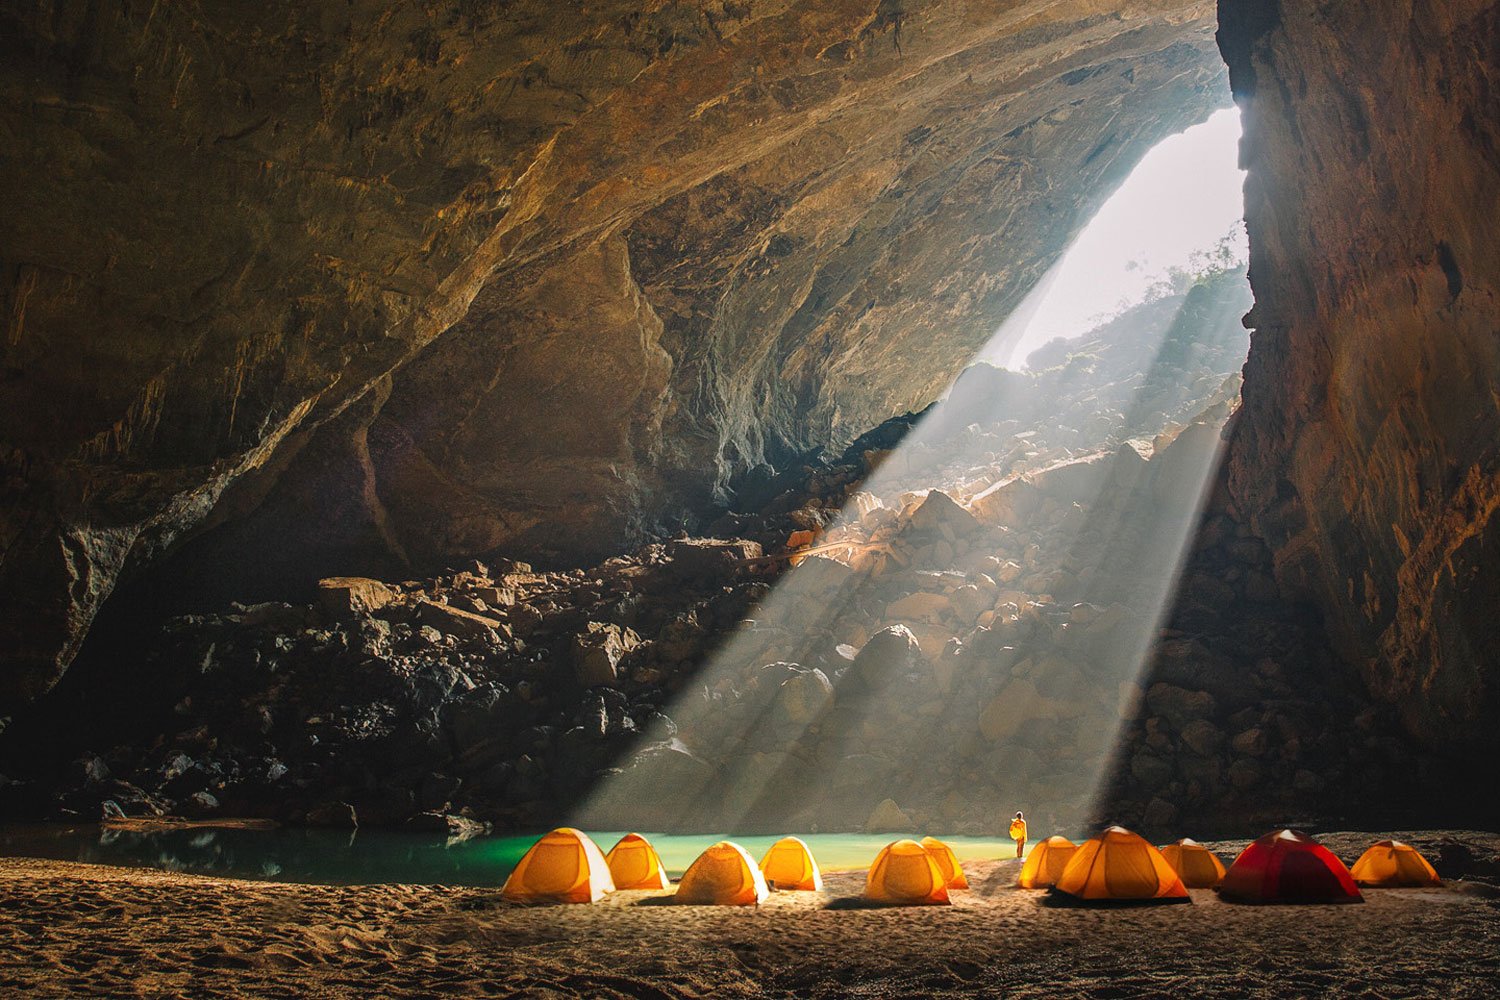 Sunbeams will shine deep into the cave campsite in the morning.